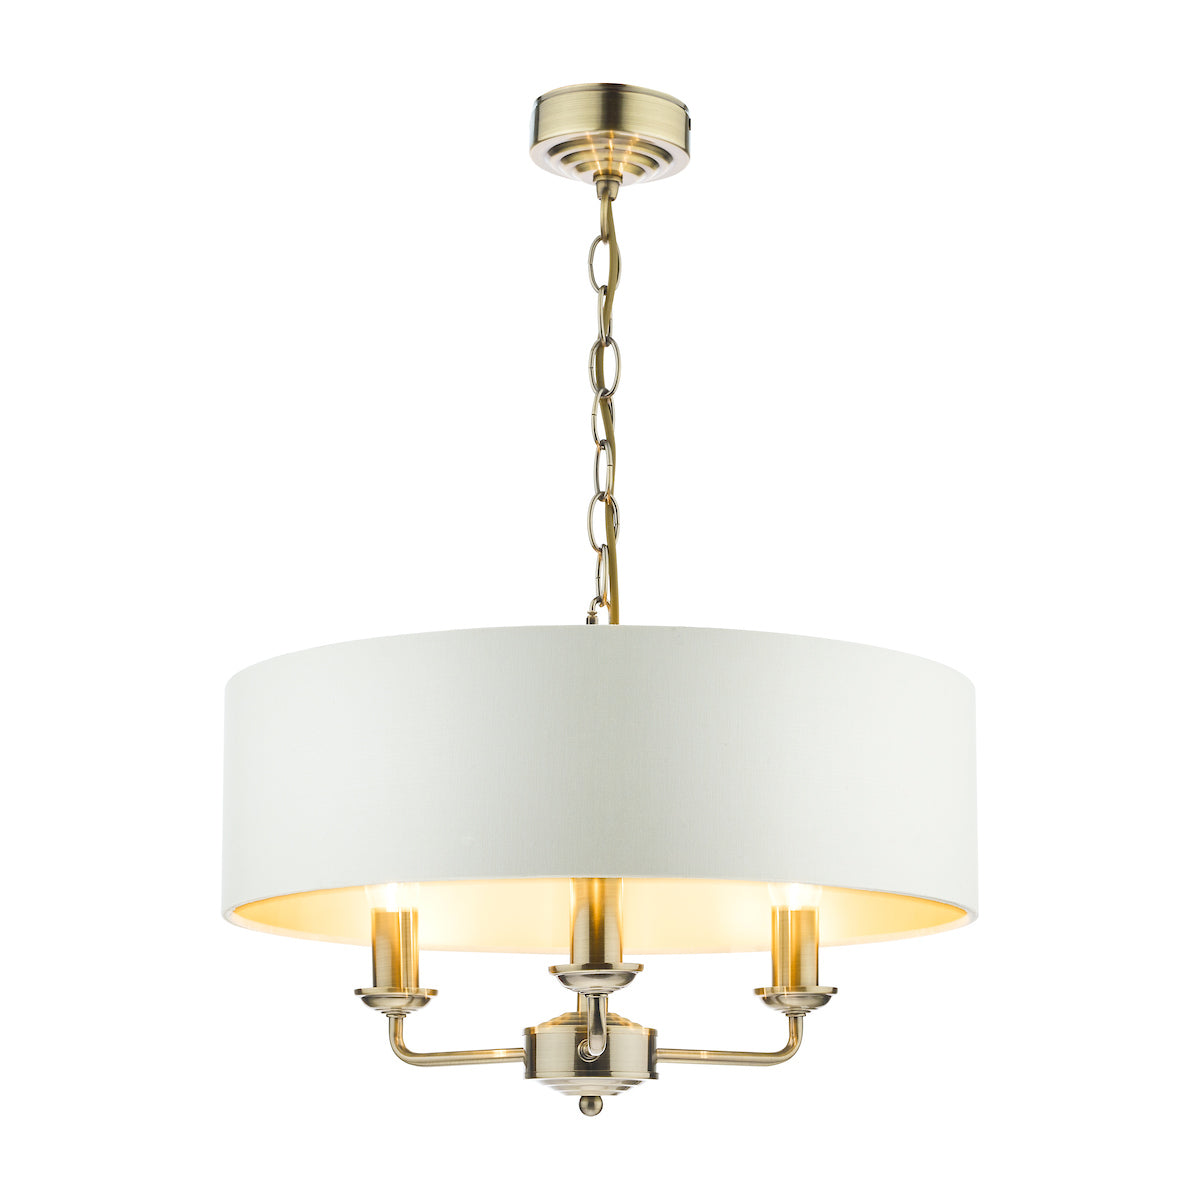 Laura Ashley Sorrento Antique Brass LA3621363-Q 3 Light Armed Fitting Ceiling Light with Ivory Shade